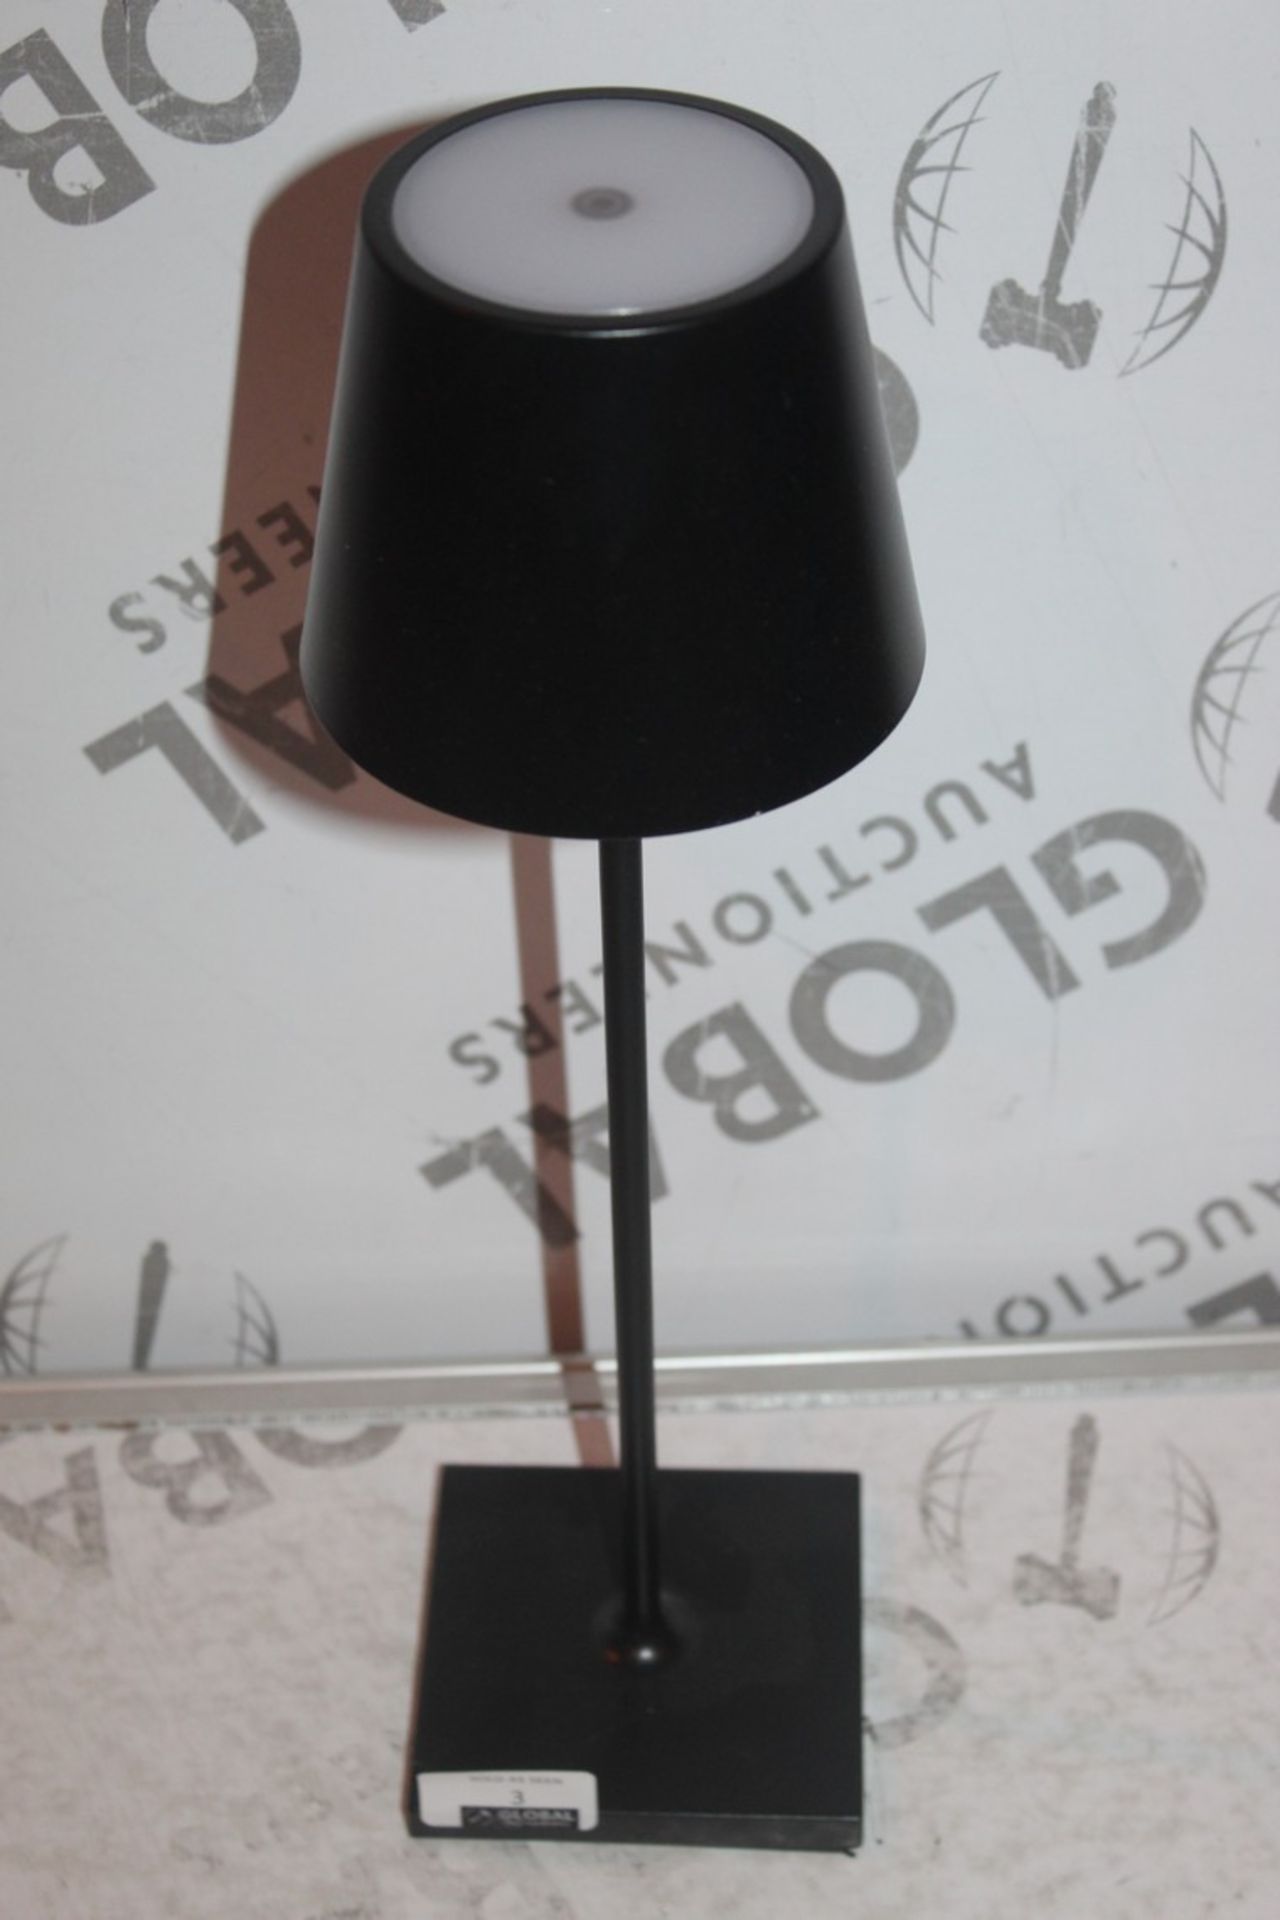 Lot to Contain 2 Décor Table Lights, Combined RRP £85.00 (17081) (Public Viewing and Appraisals